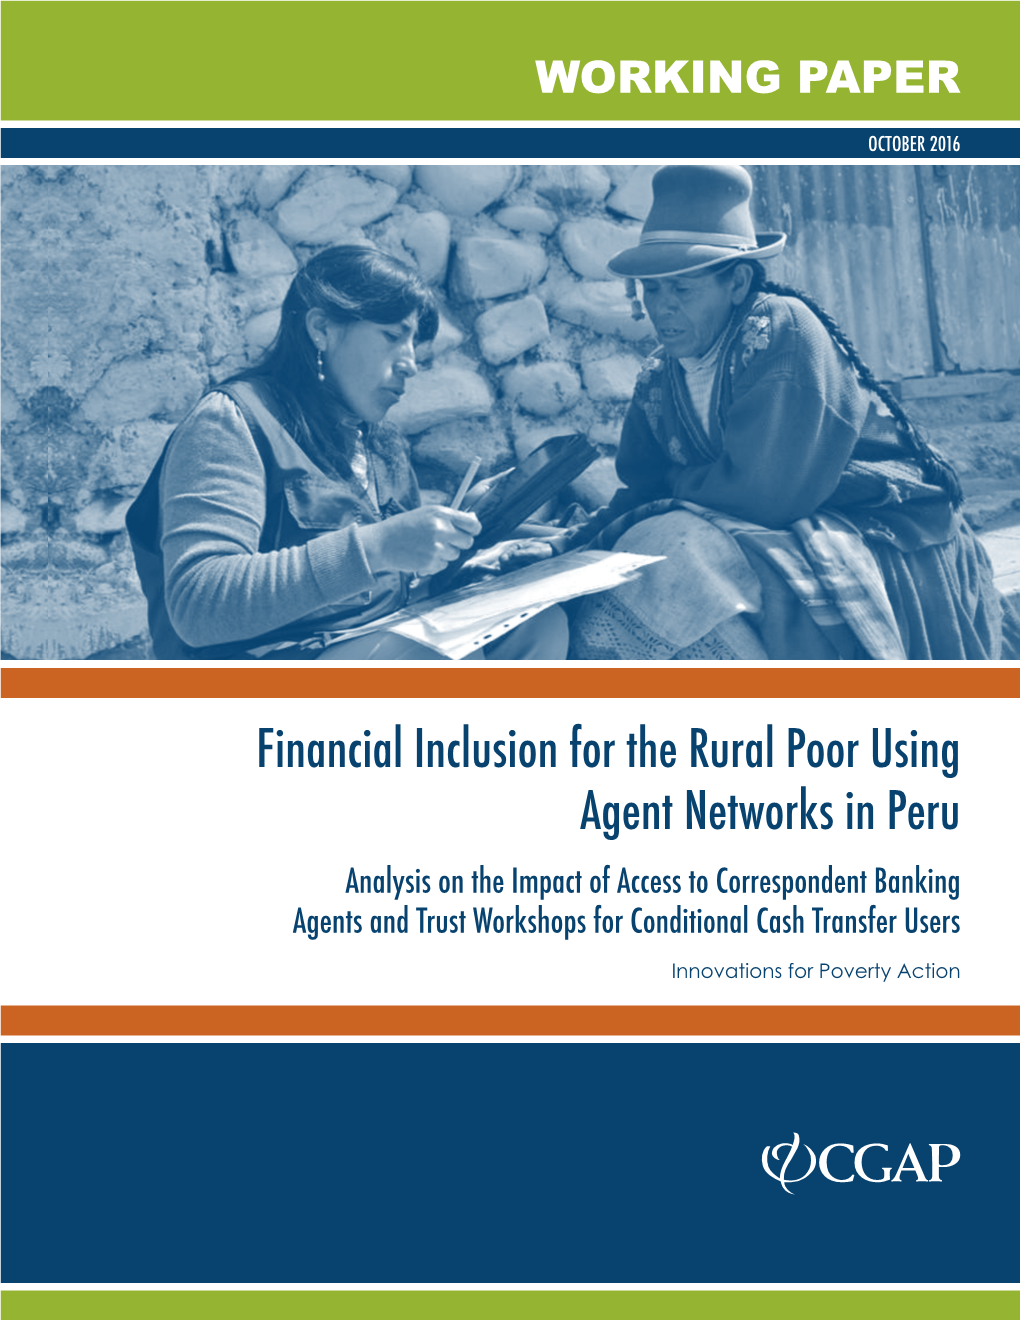 Financial Inclusion for the Rural Poor Using Agent Networks in Peru